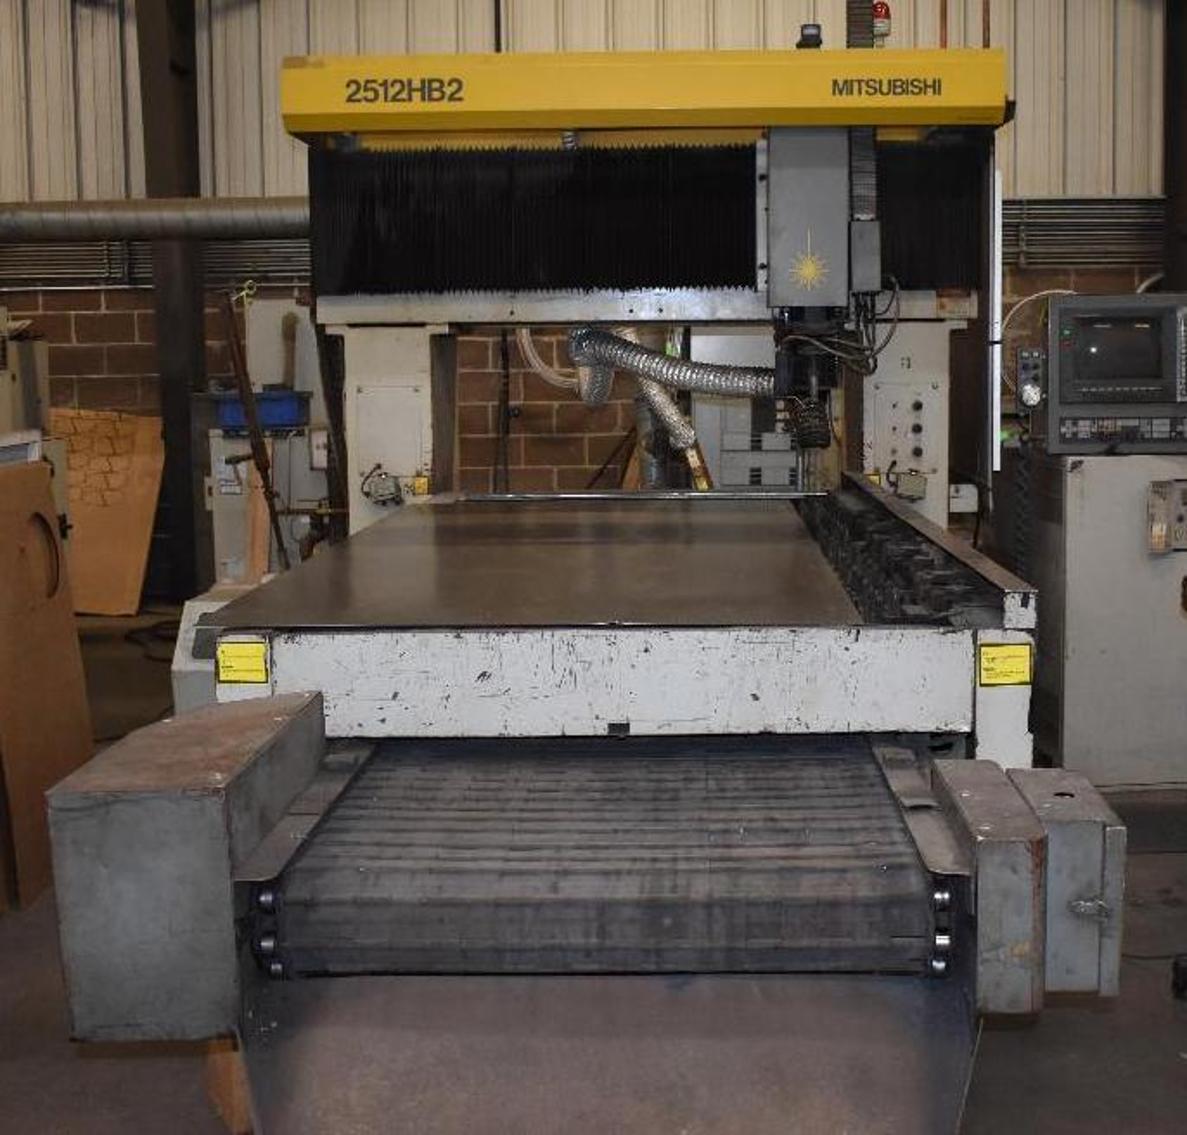 Complete Liquidation Micra Enterprise: CNC, Laser Cutters, Fabrication and Welding Equipment